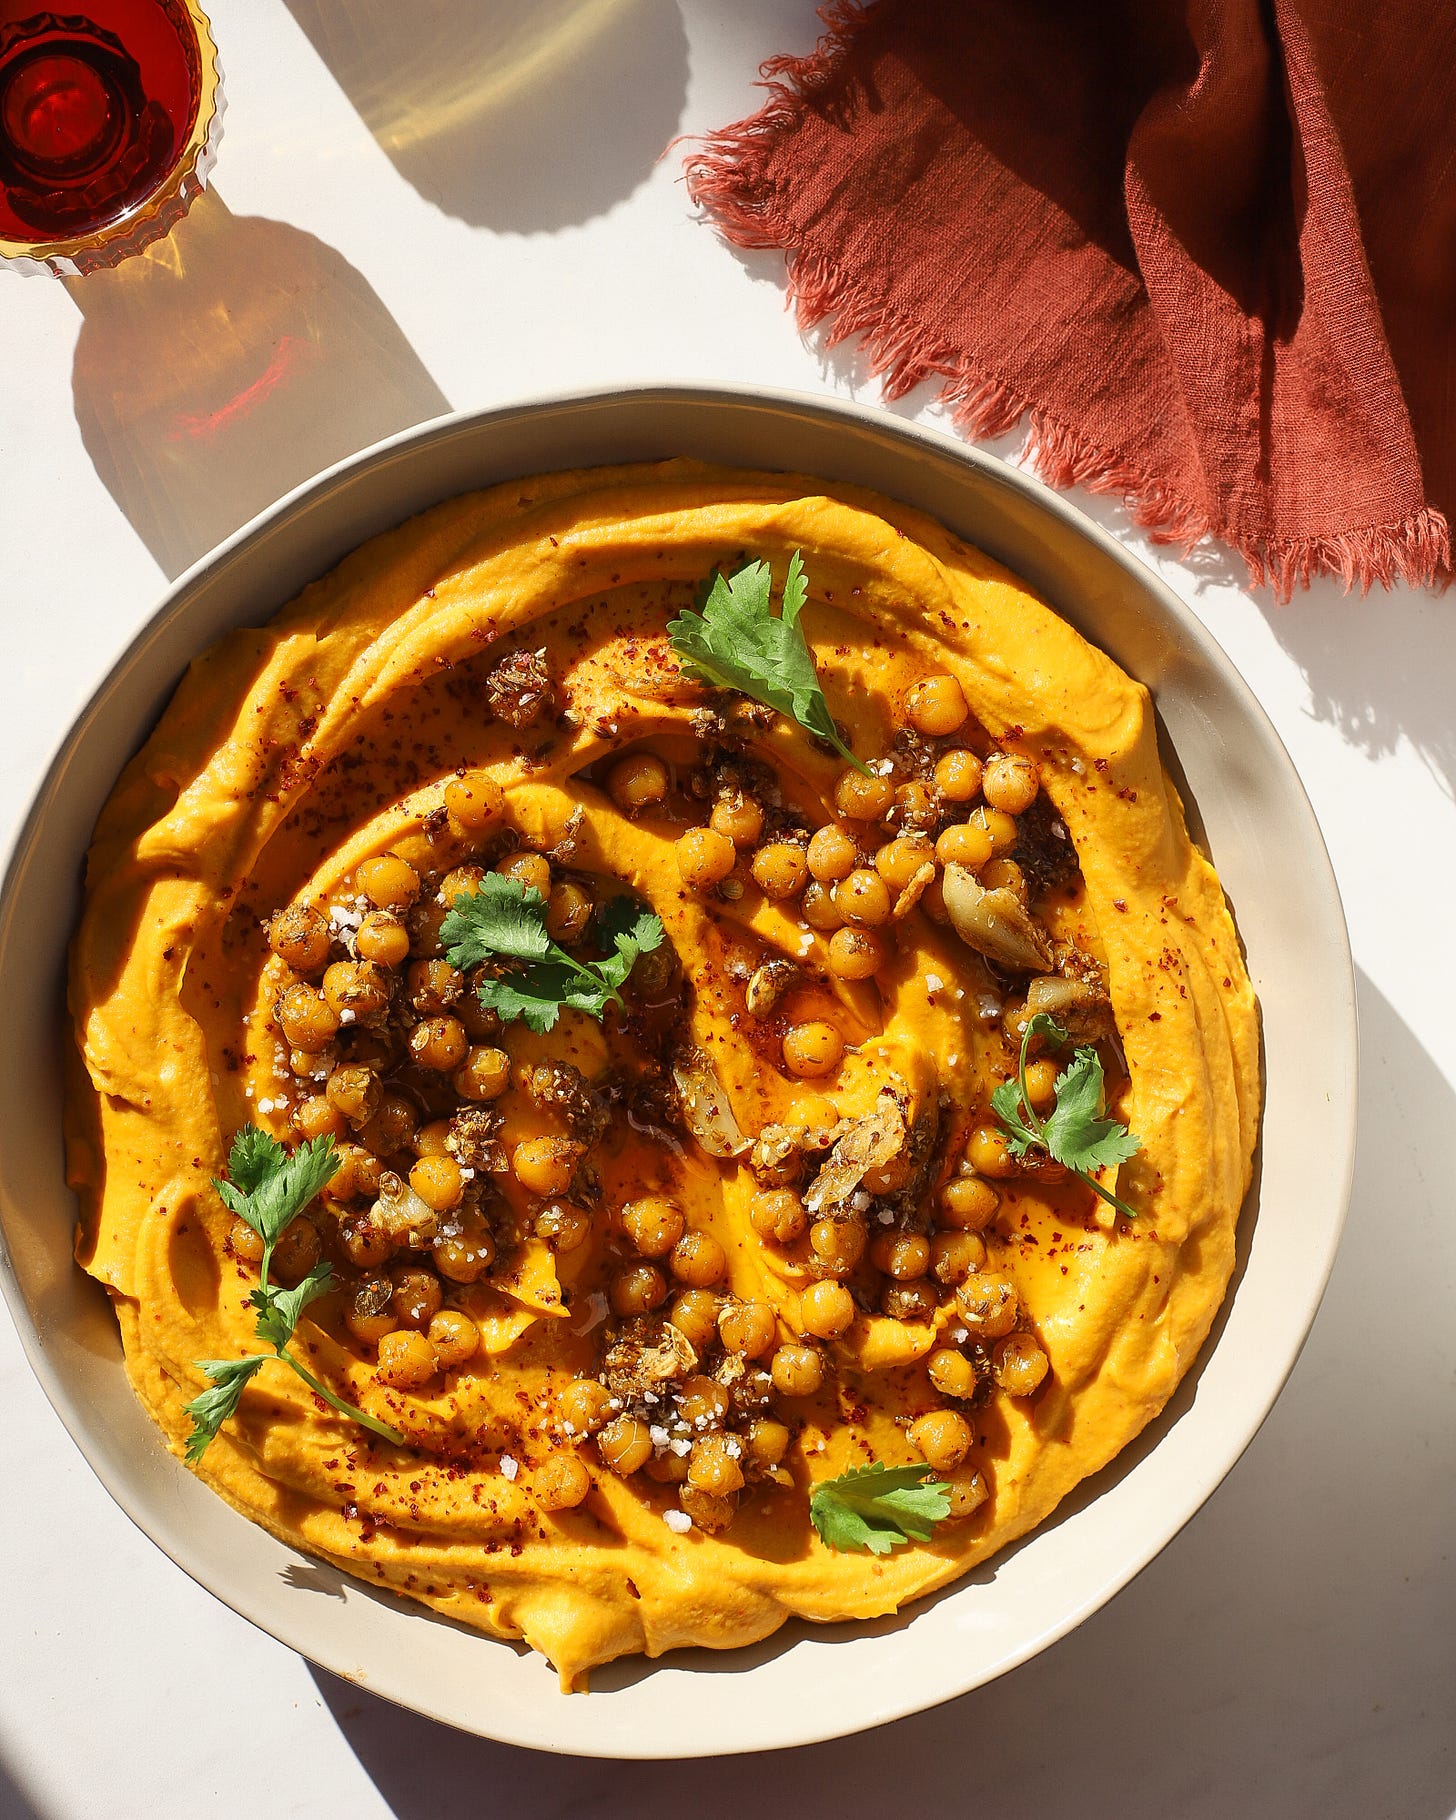 Honeynut squash dip drenched in sunlight